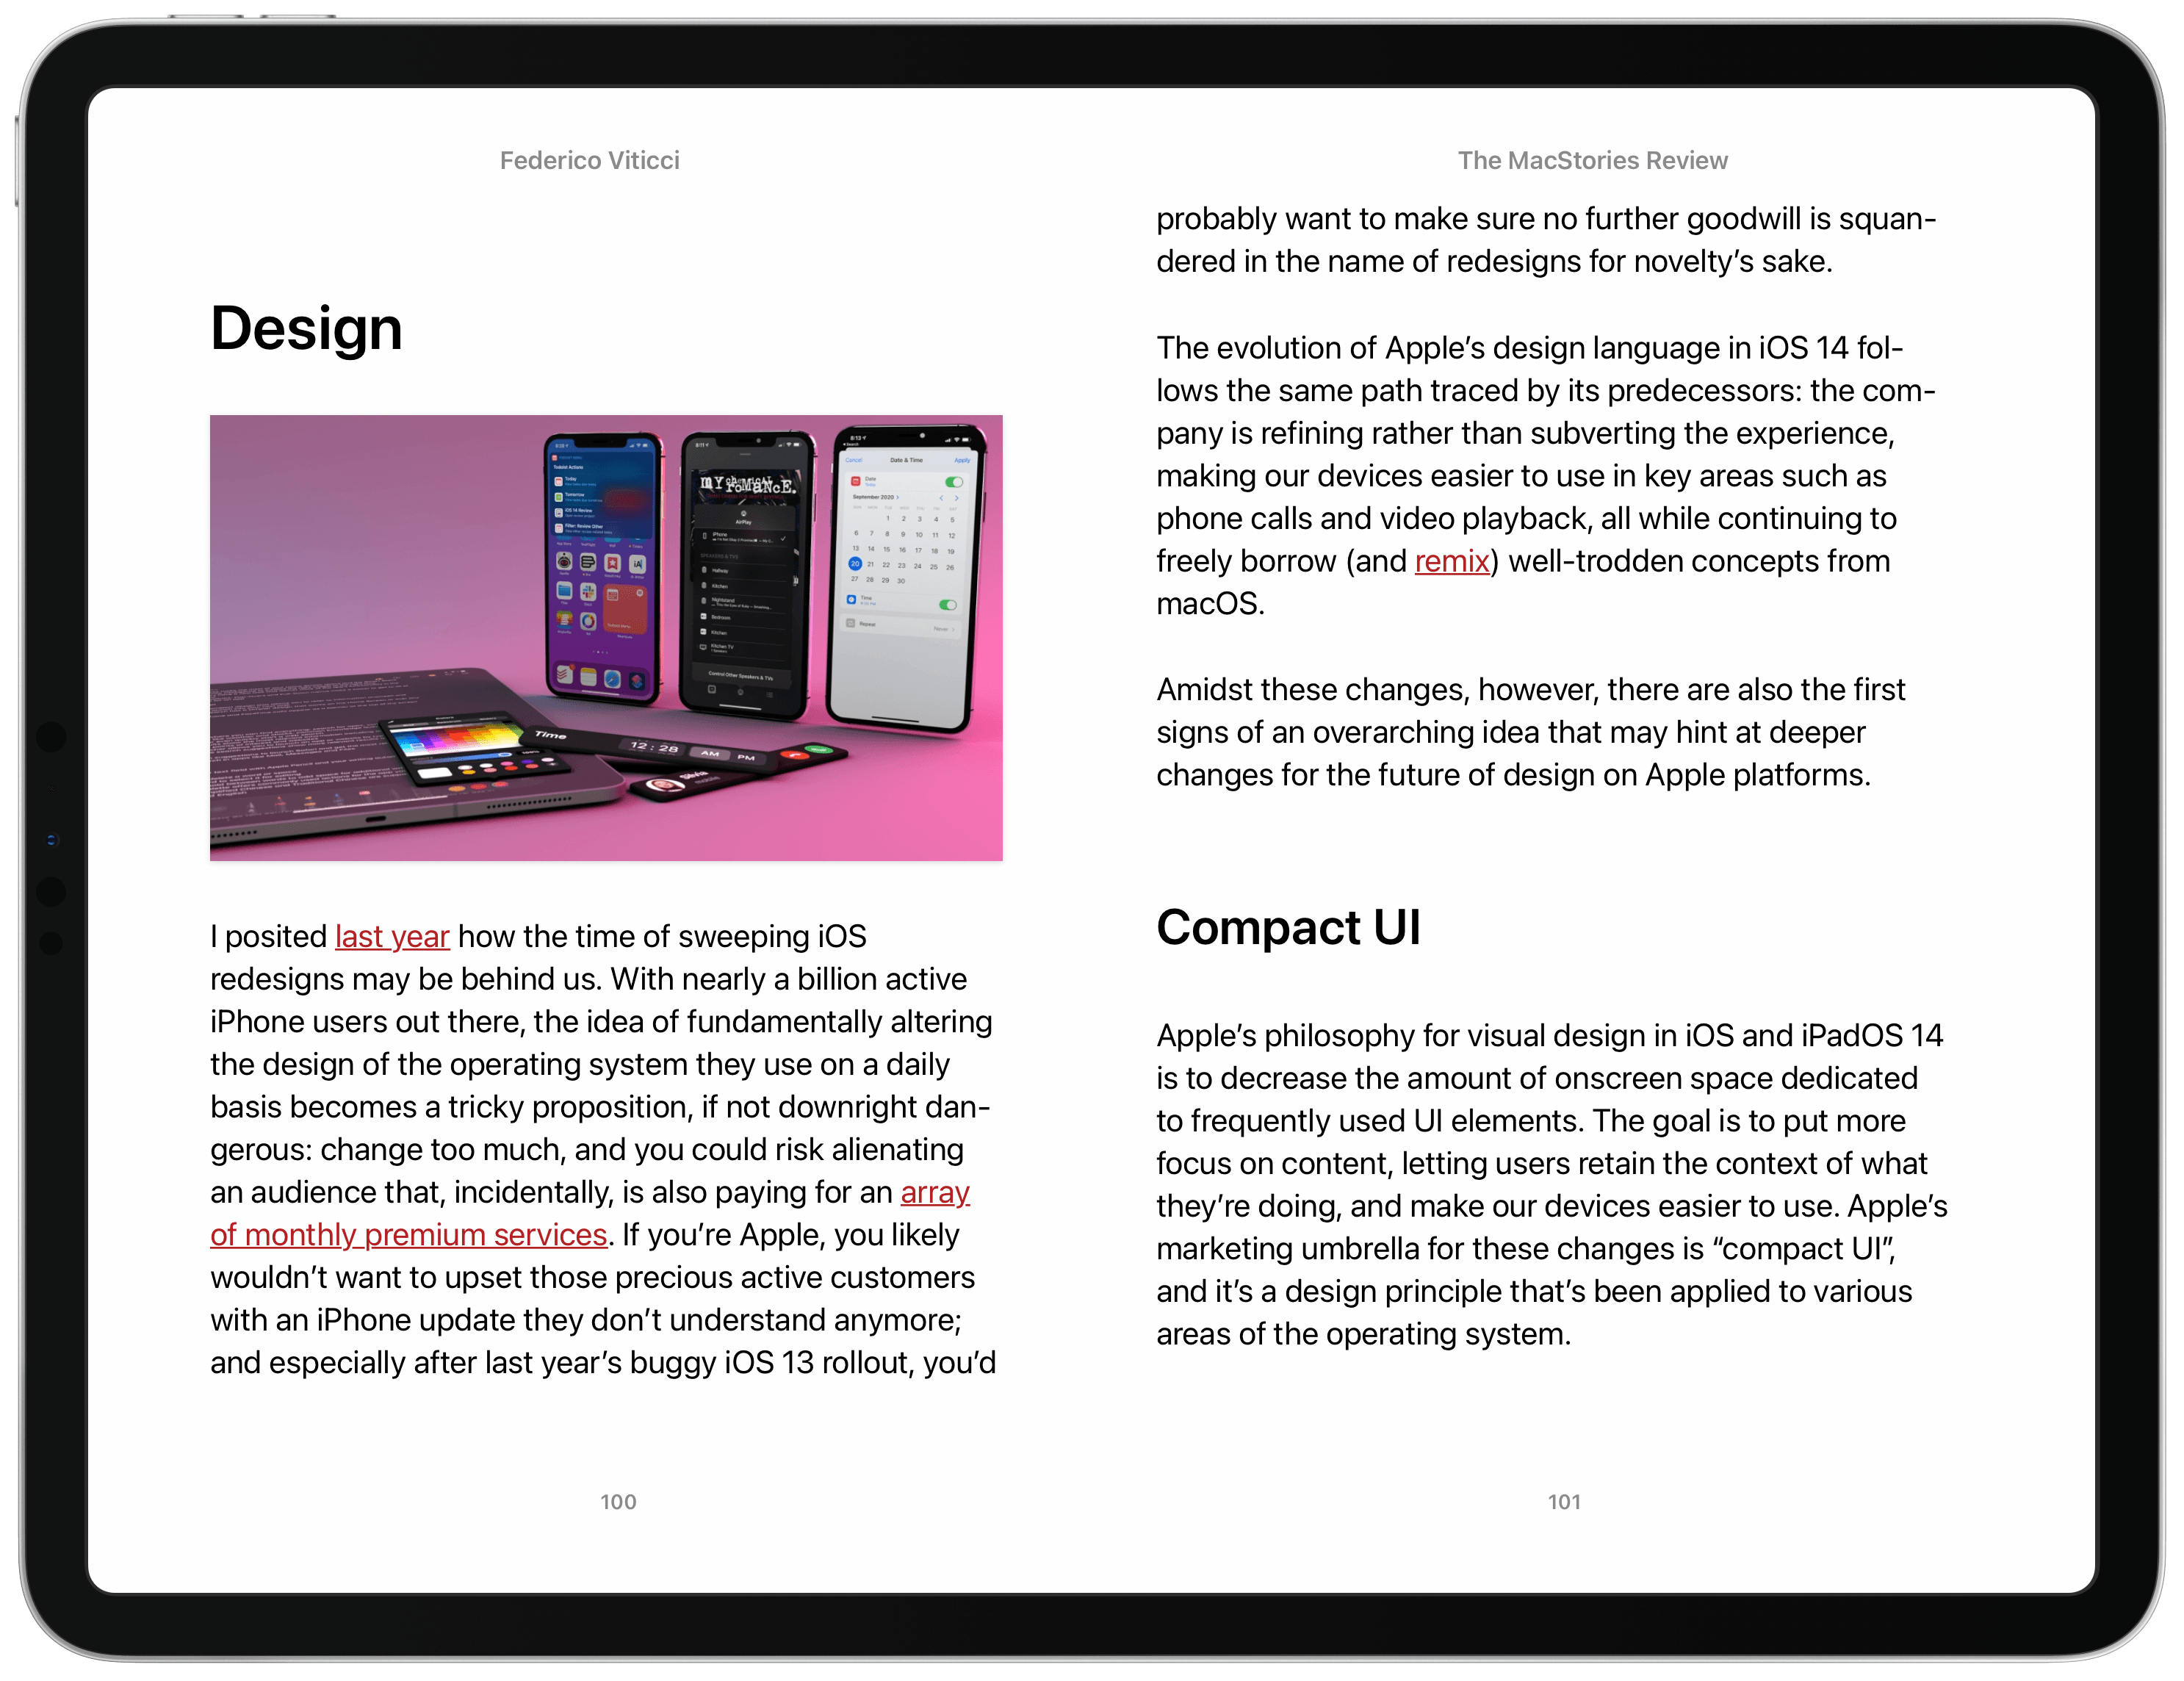 Federico's iOS and iPadOS 14 review in the Books app.